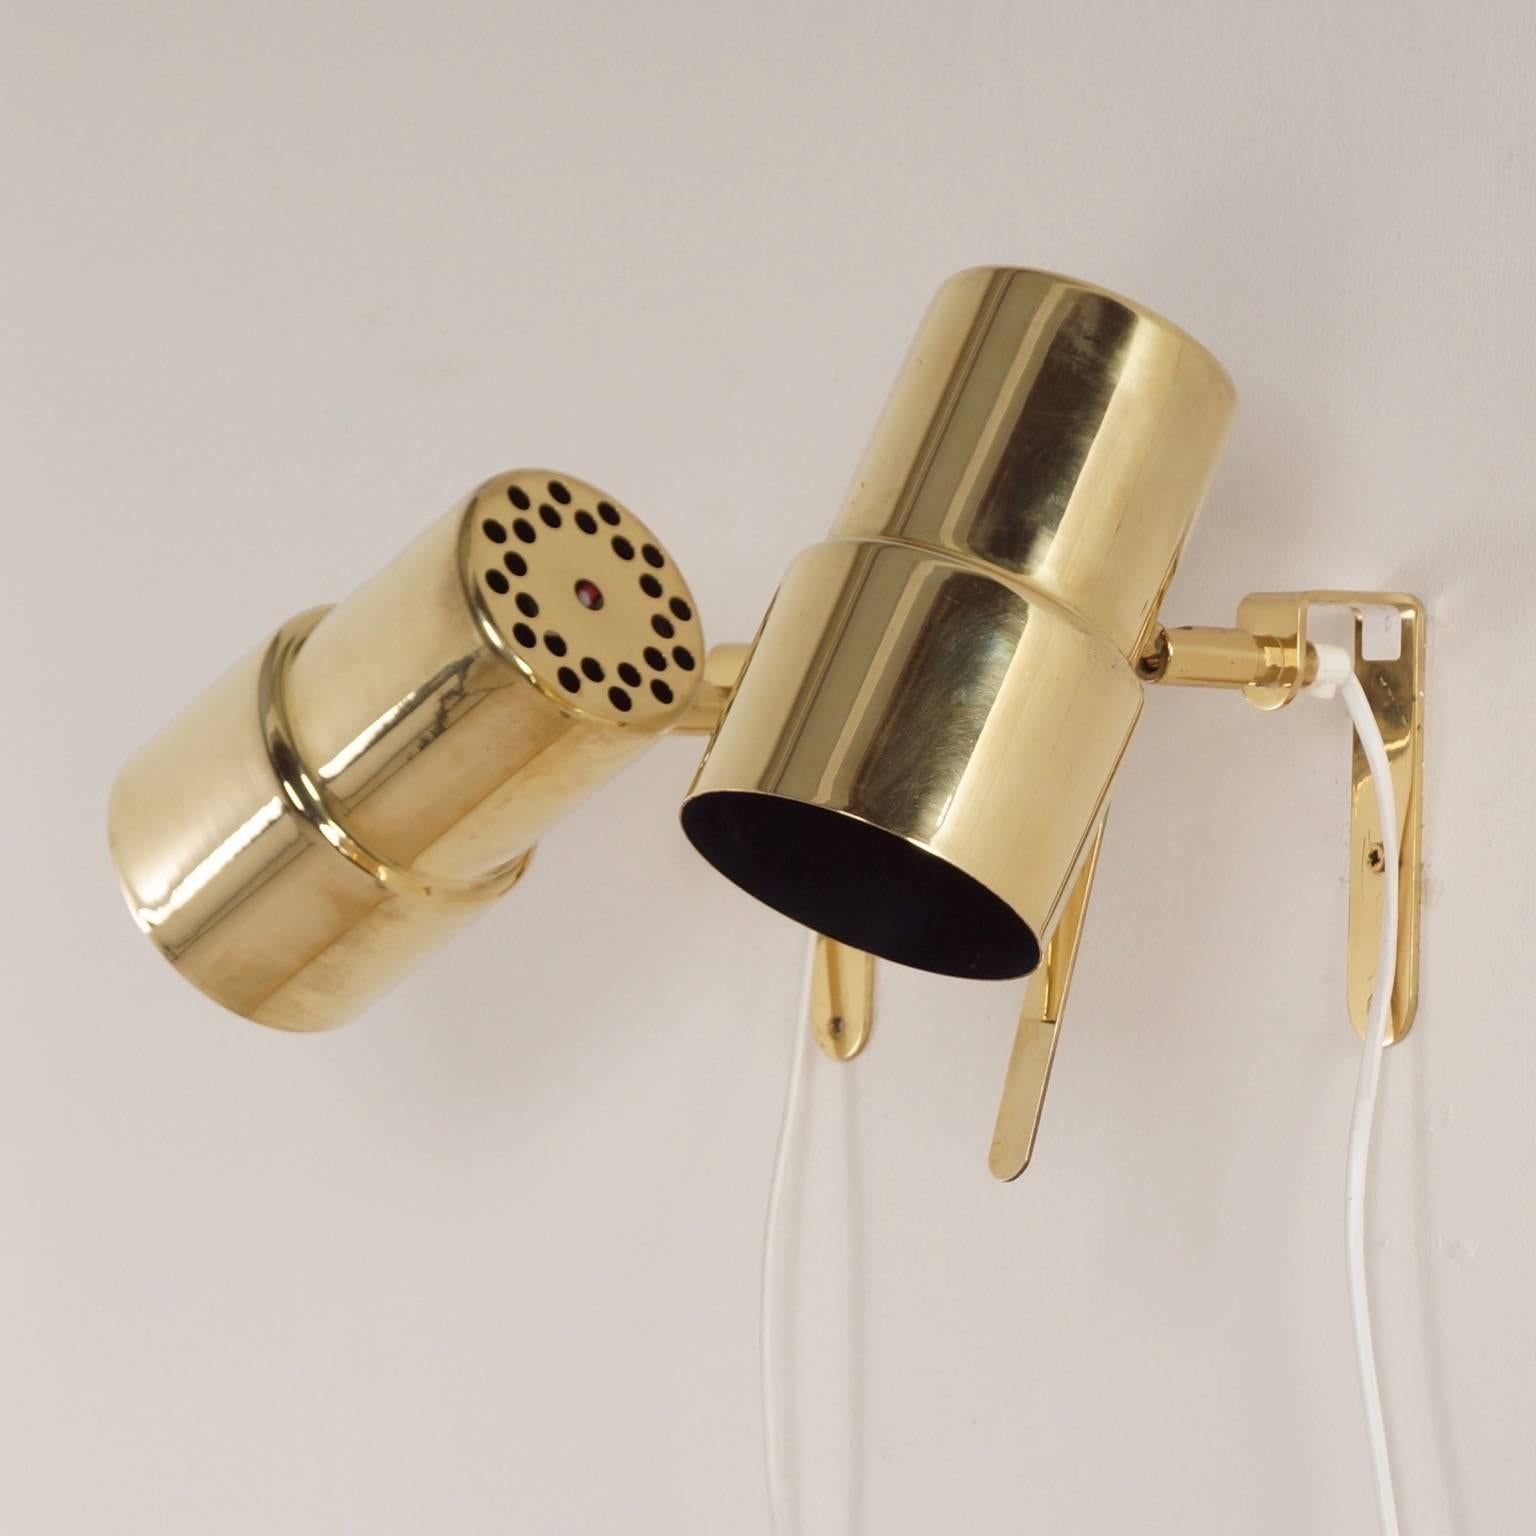 Adjustable brass wall or bedside lamps designed by Hans Agne Jakobsson for AB Markaryd, Sweden in the 1970s. Given the age of the Swedish lights are still in original and very good condition, minimal wear. The lights are cleaned, polished and the